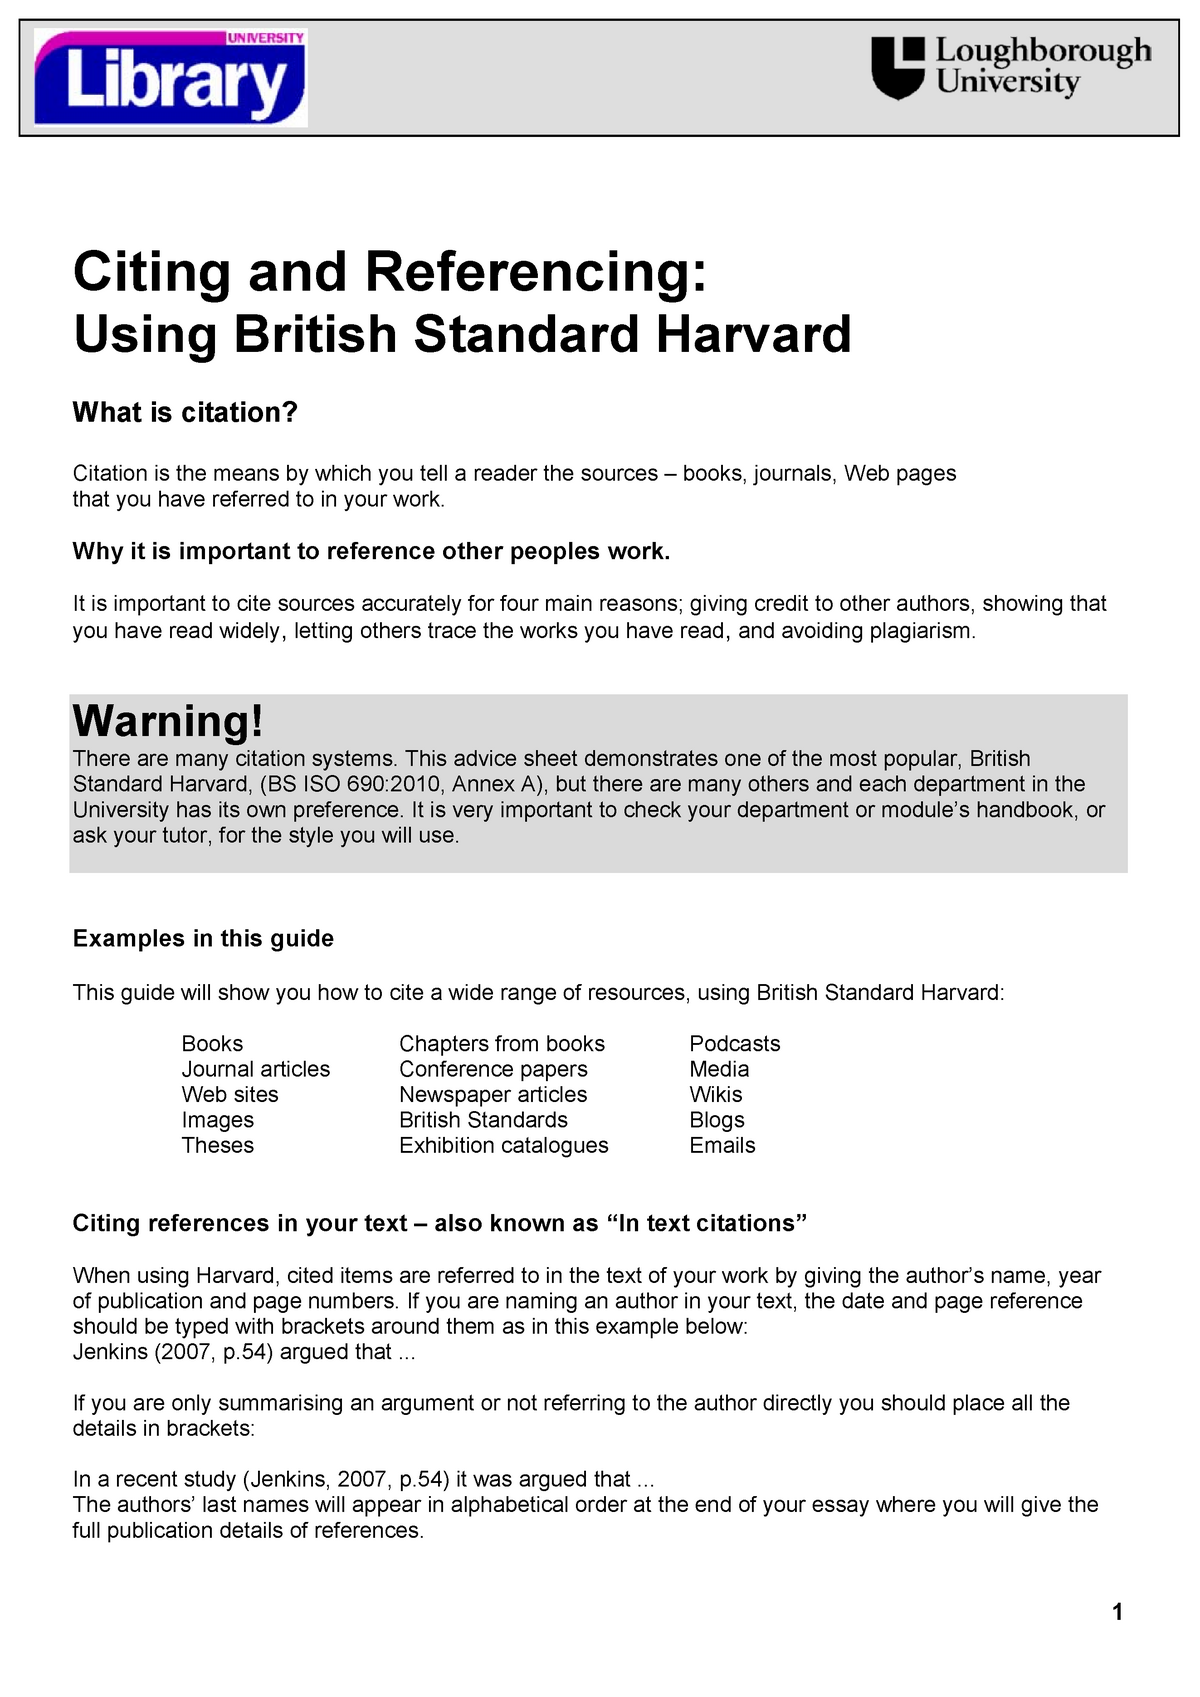 cite a website in text harvard